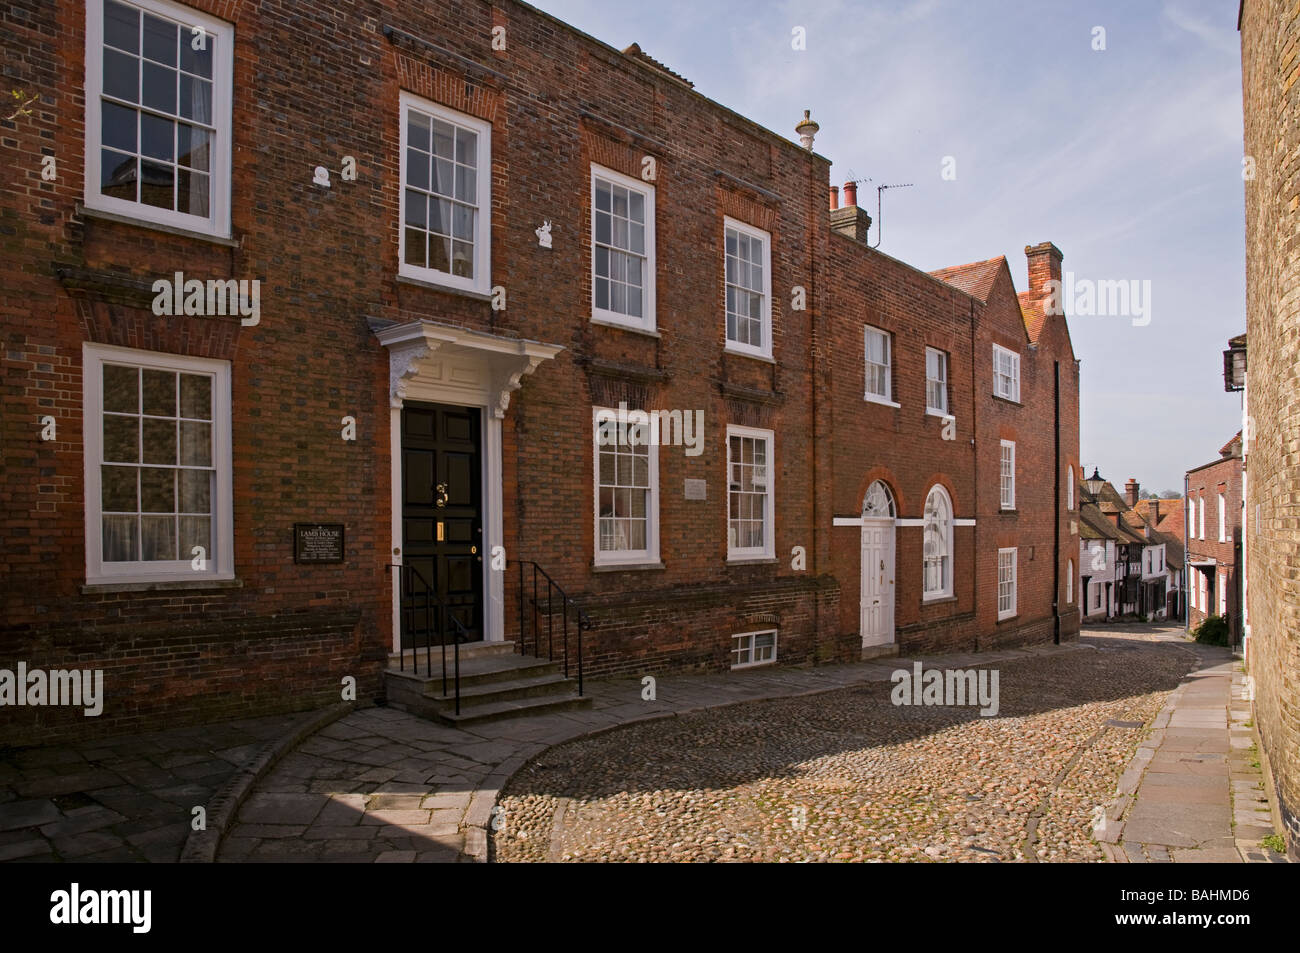 Lamb House, former home of author Henry James, in Rye, East Sussex, England Stock Photo